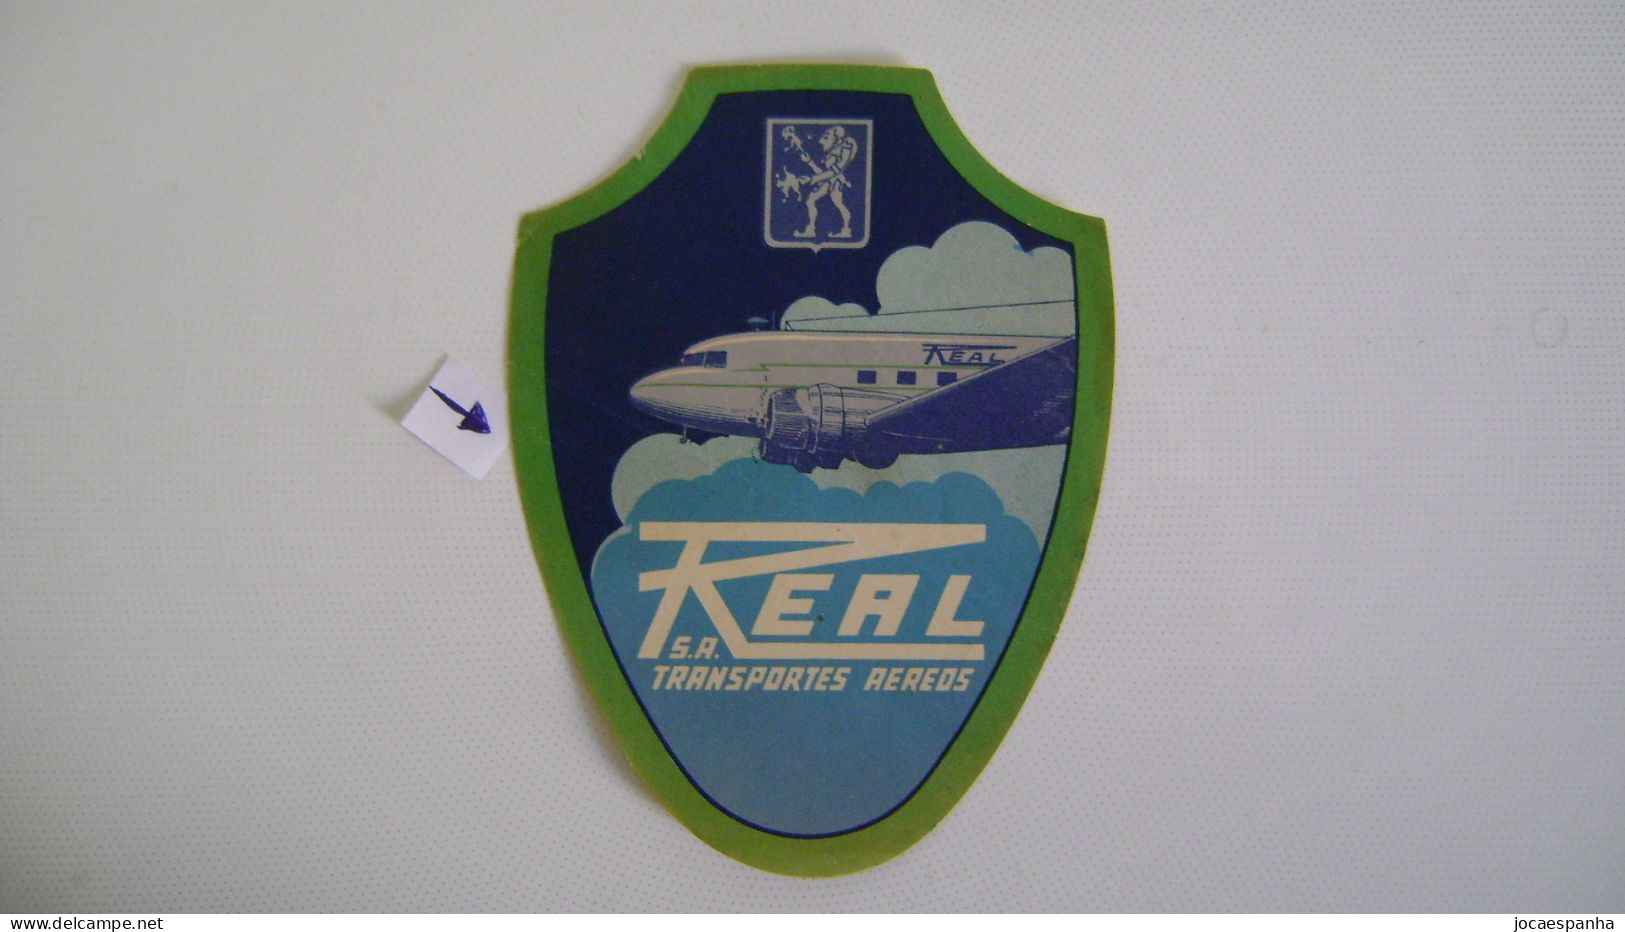 BRAZIL / BRASIL - LABEL OF THE REAL TRANSPORTES AEREOS AIRLINE COMPANY IN THE STATE - Publicités